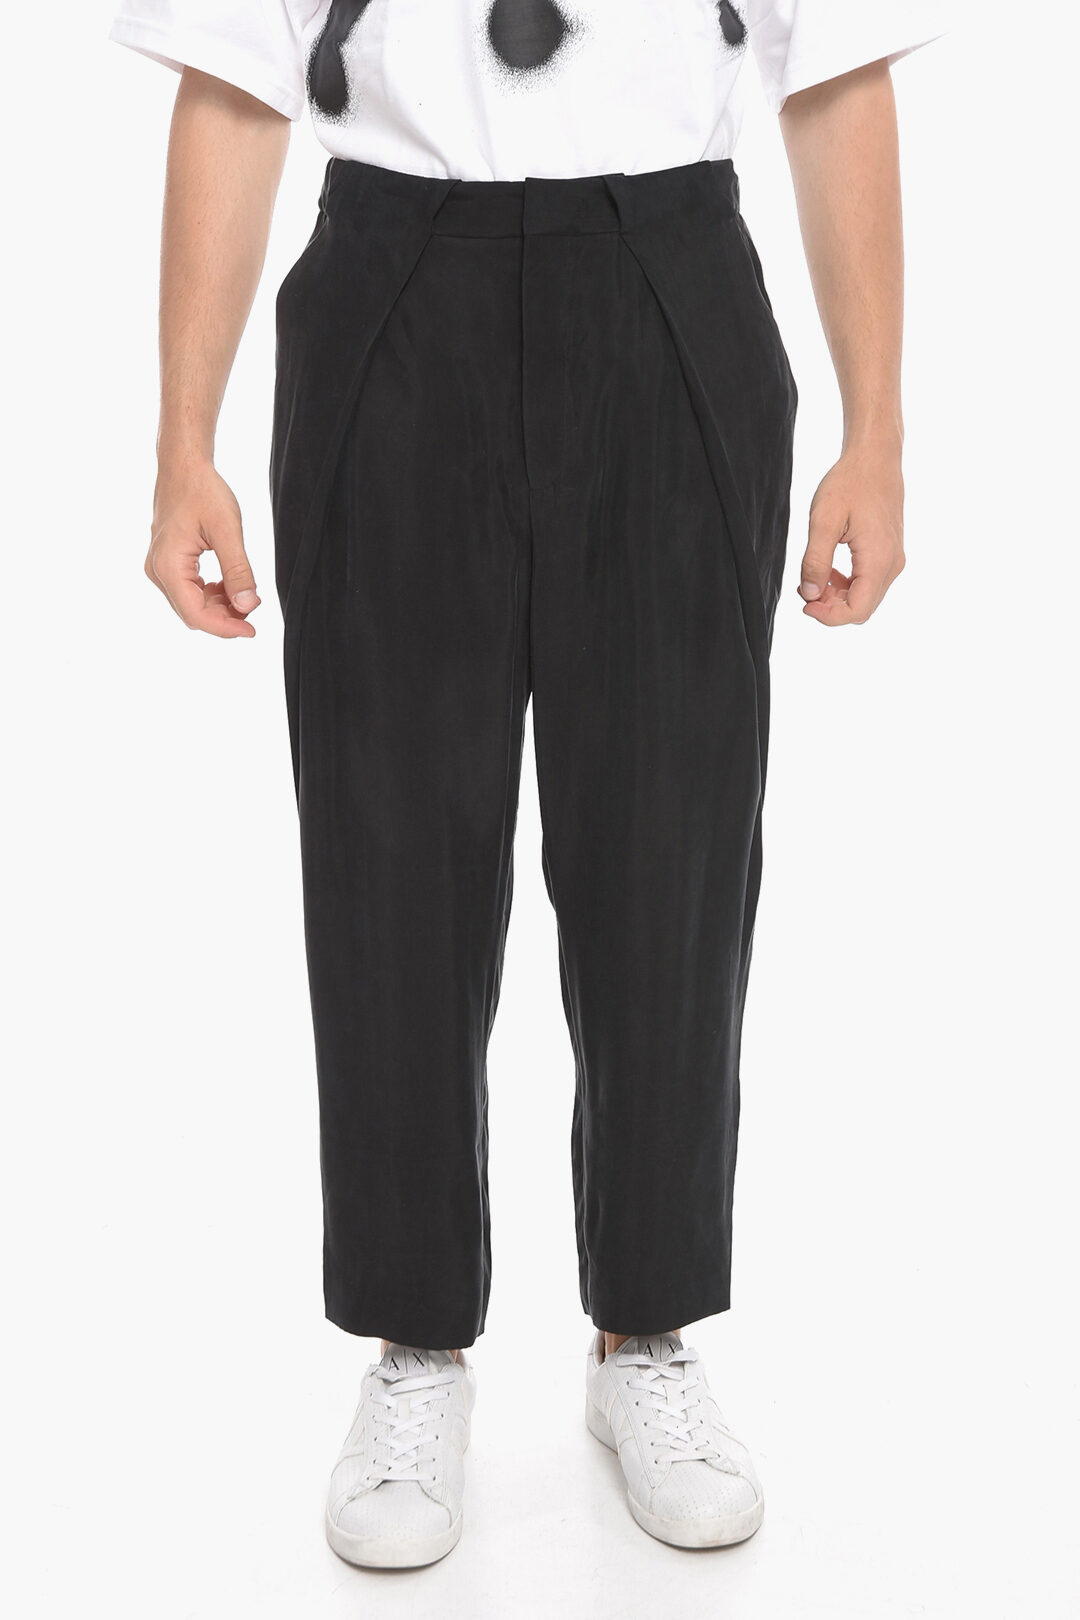 Balmain Cupro Cropped Trousers with One Pleat Front men - Glamood Outlet